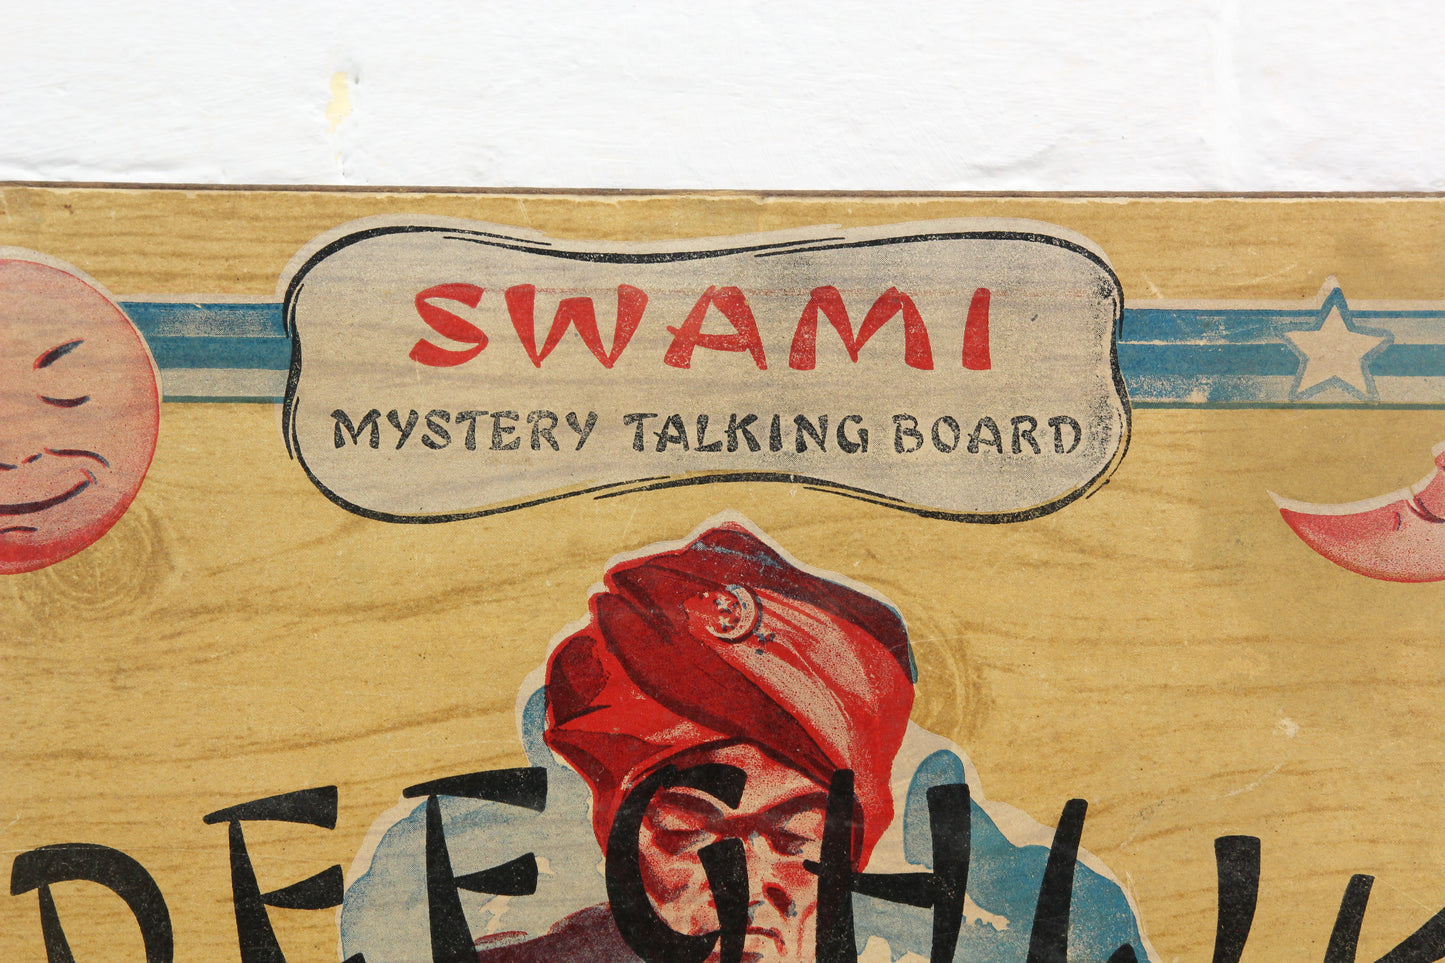 Swami Mystery Talking Board by National Novelties, Chicago, Illinois, Cicra 1940